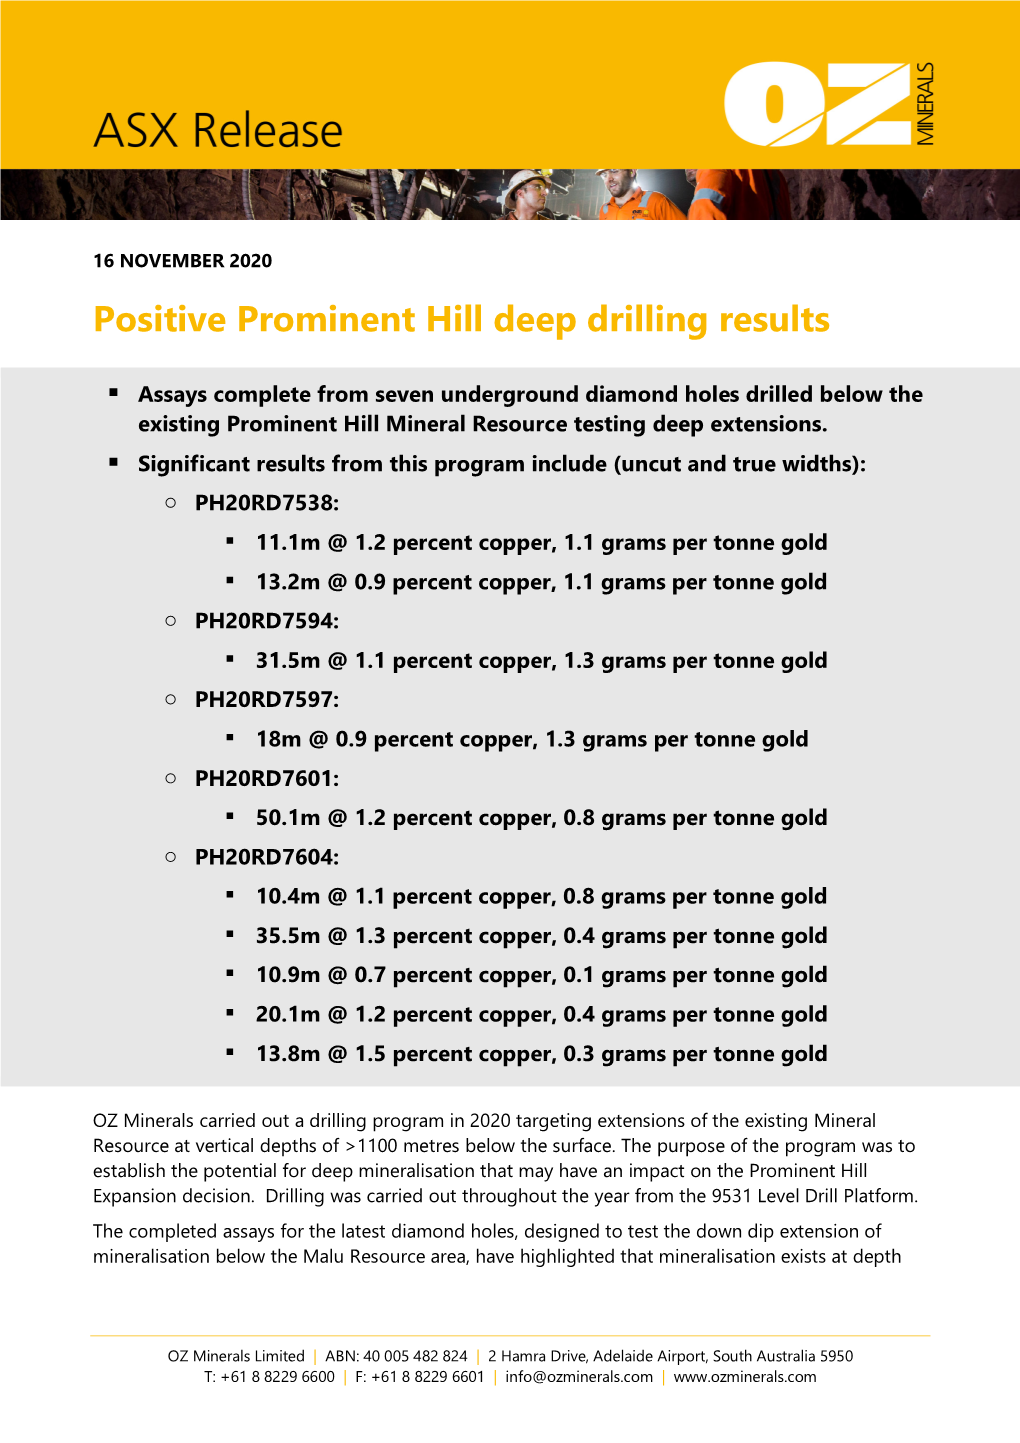 2020 Positive Prominent Hill Deep Drilling Results